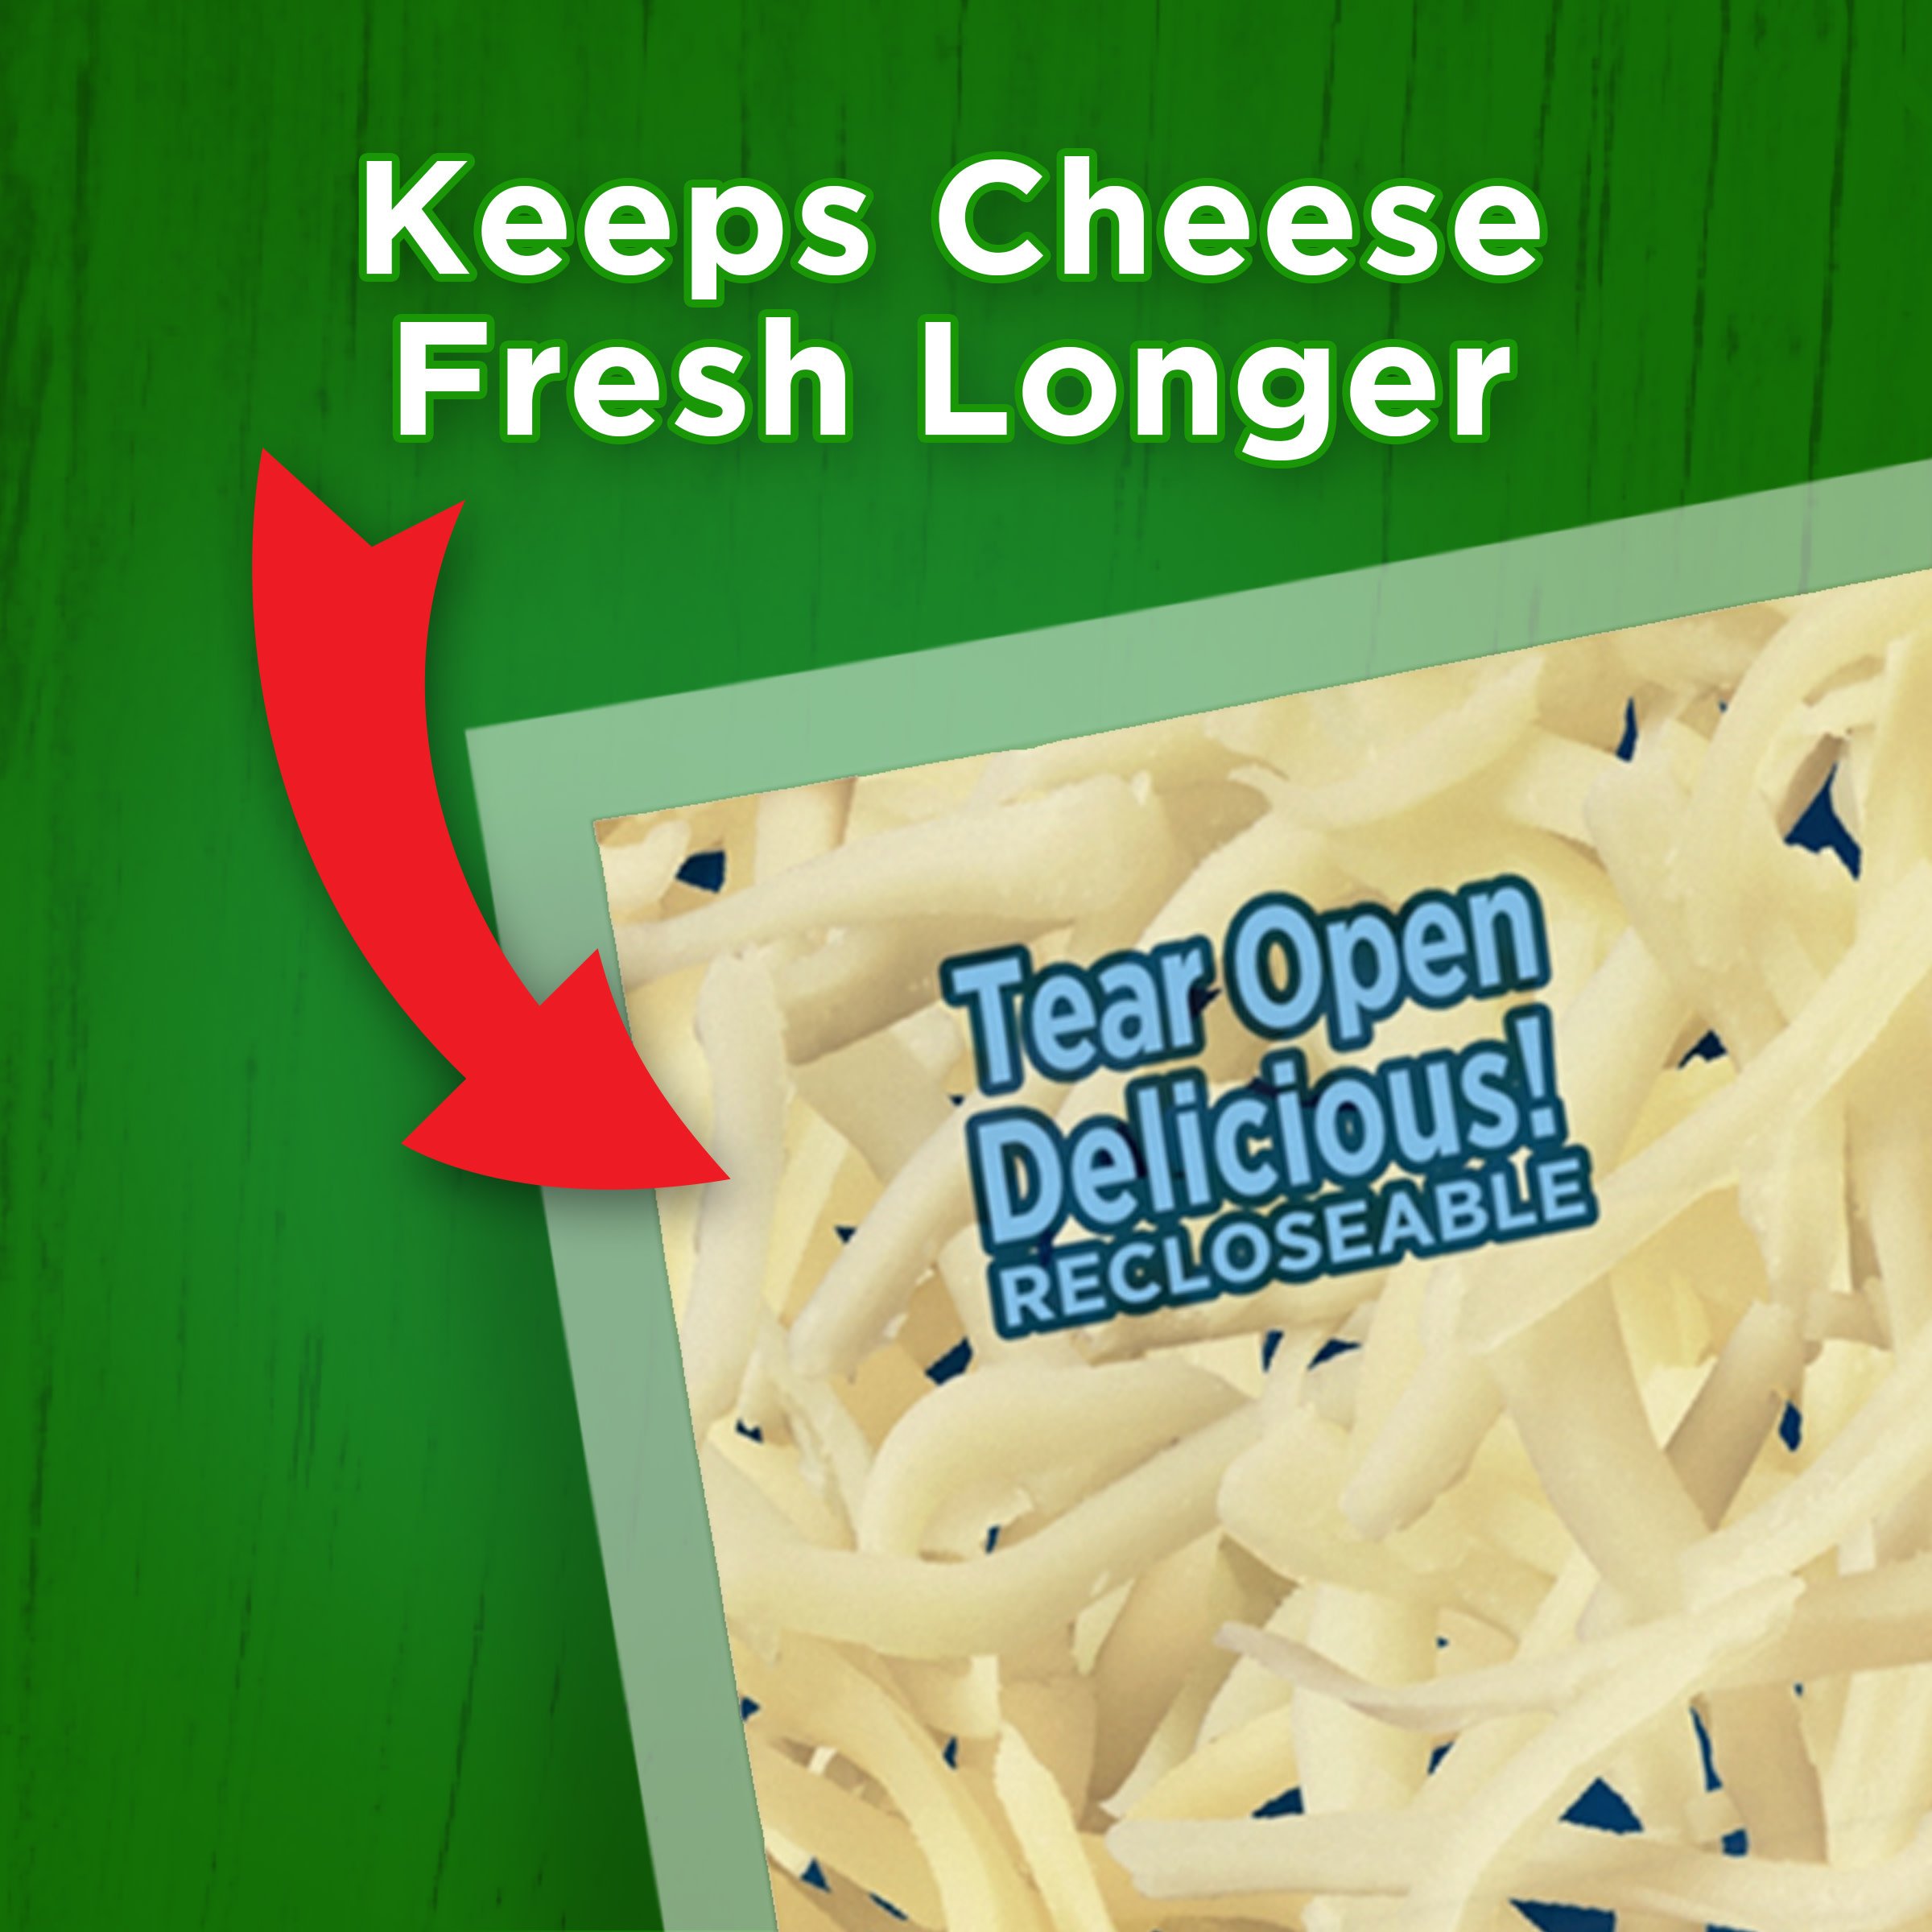 Save on Kraft Mozzarella Cheese Low-Moisture Part-Skim Shredded Natural  Order Online Delivery